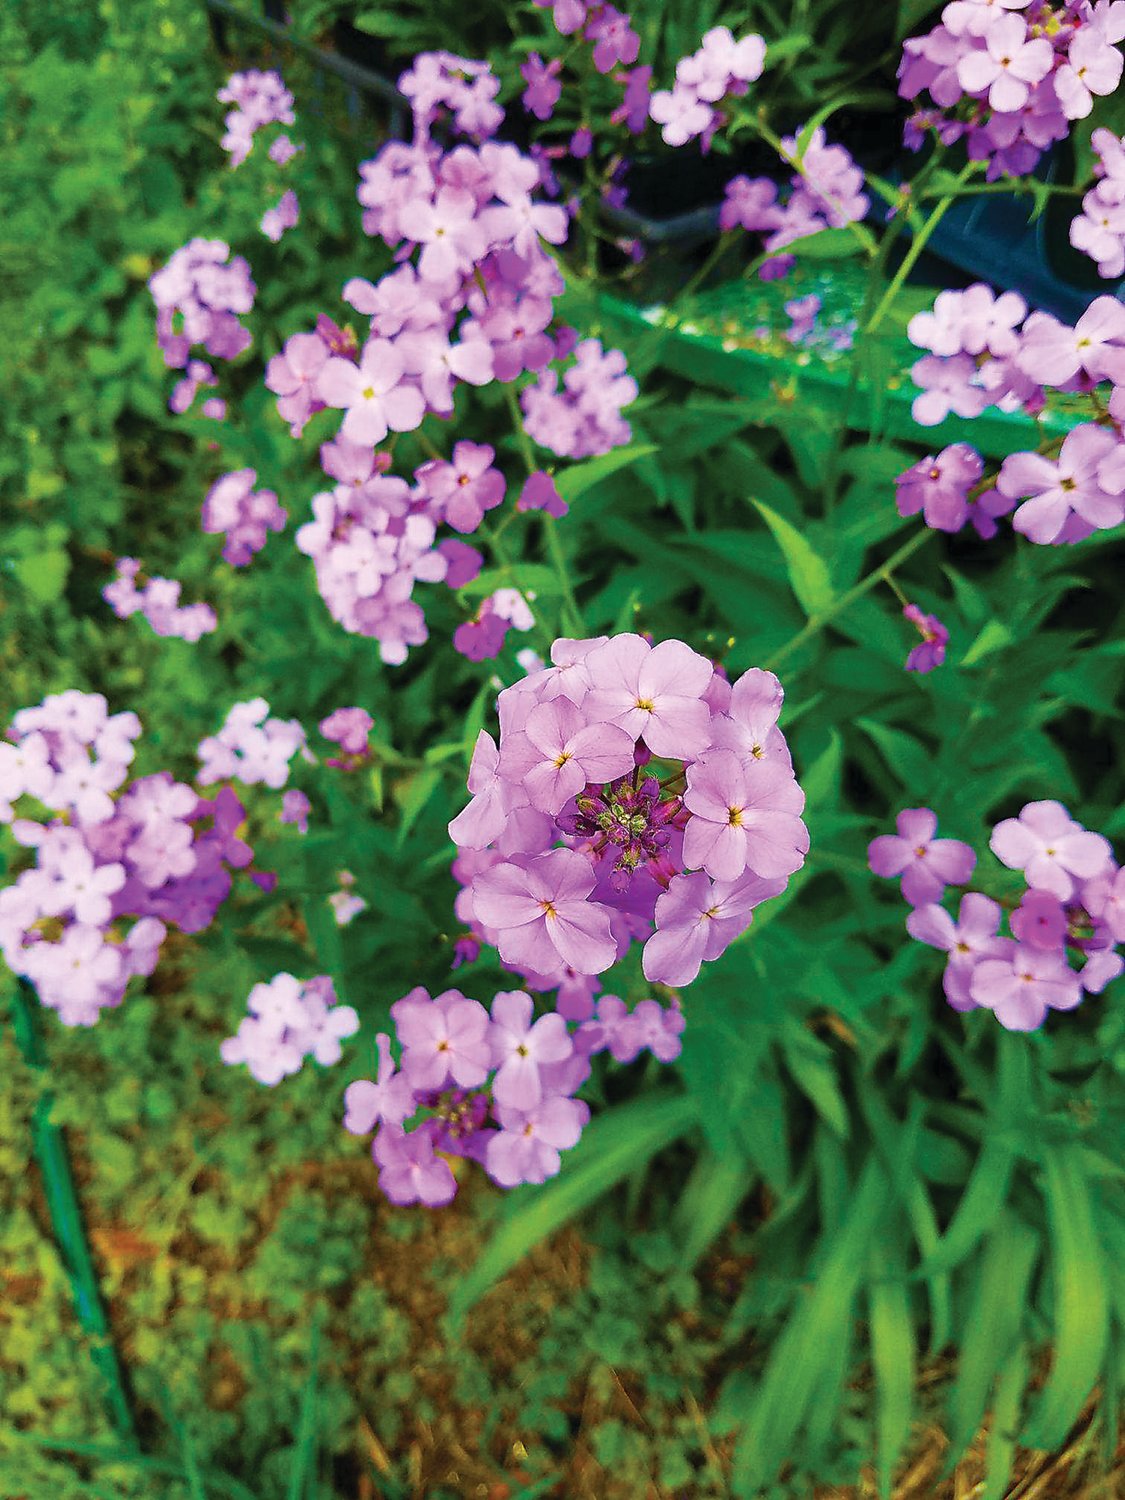 Dame’s rocket, now proliferating along highways resembles phlox but it is an invasive plant that pushes out the natives.